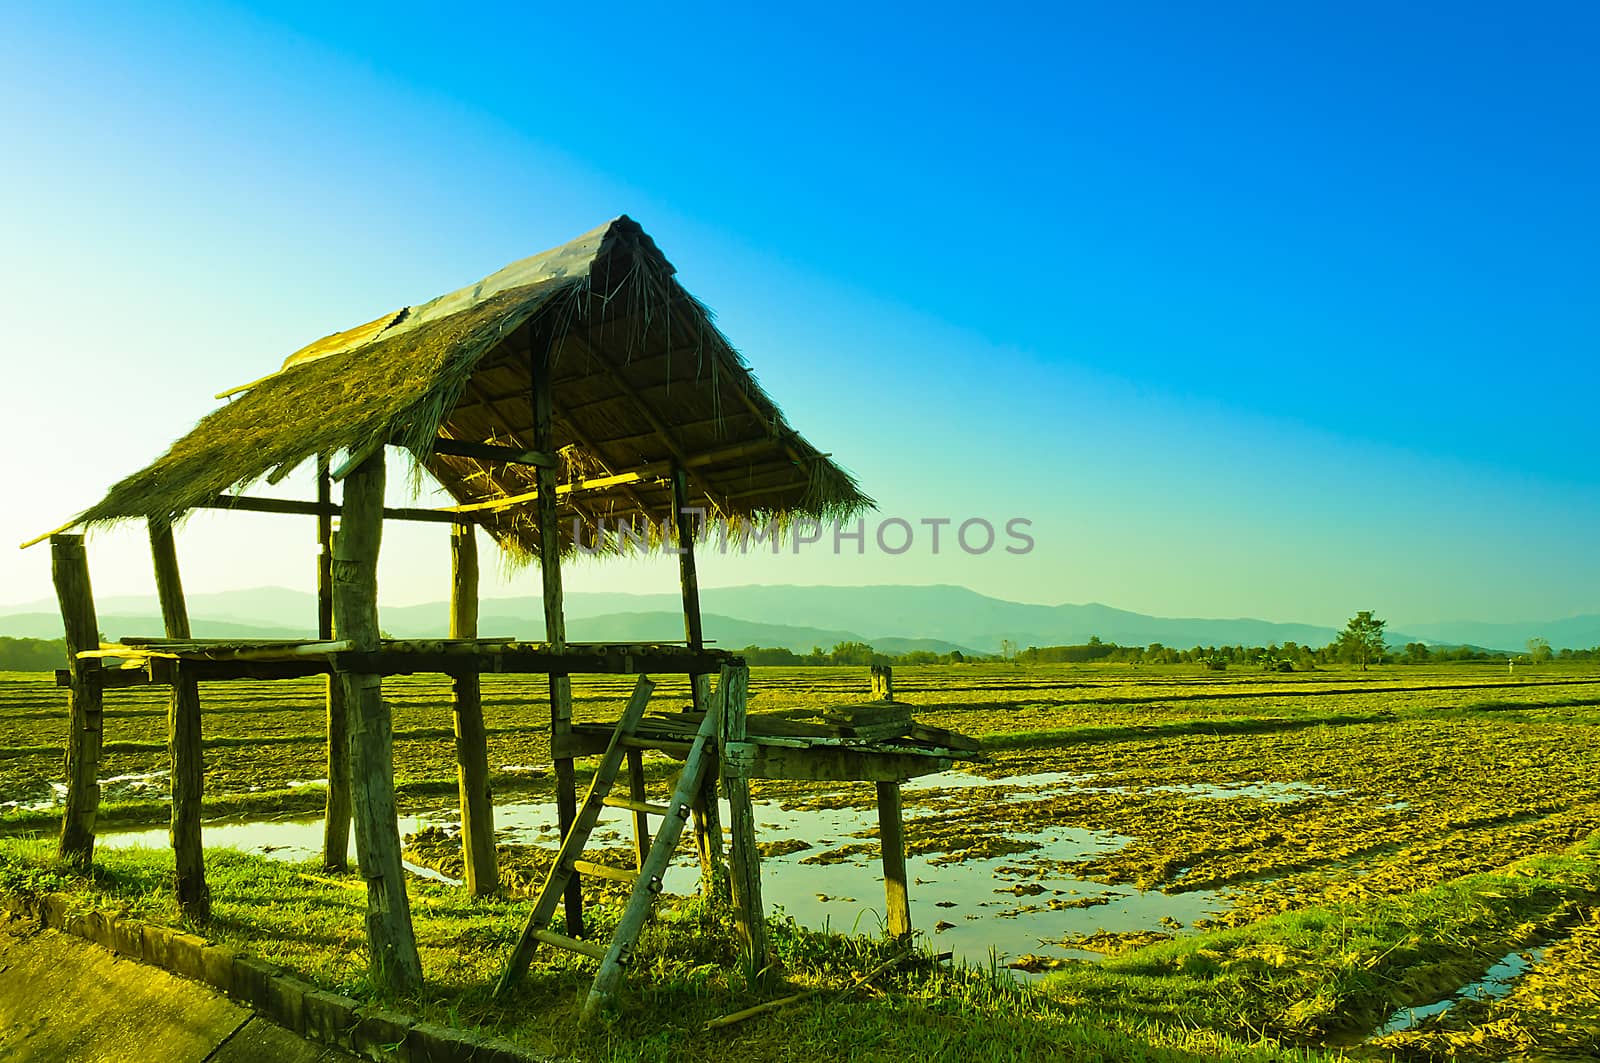 The Faemer's Little Shack biside the Rice Field.